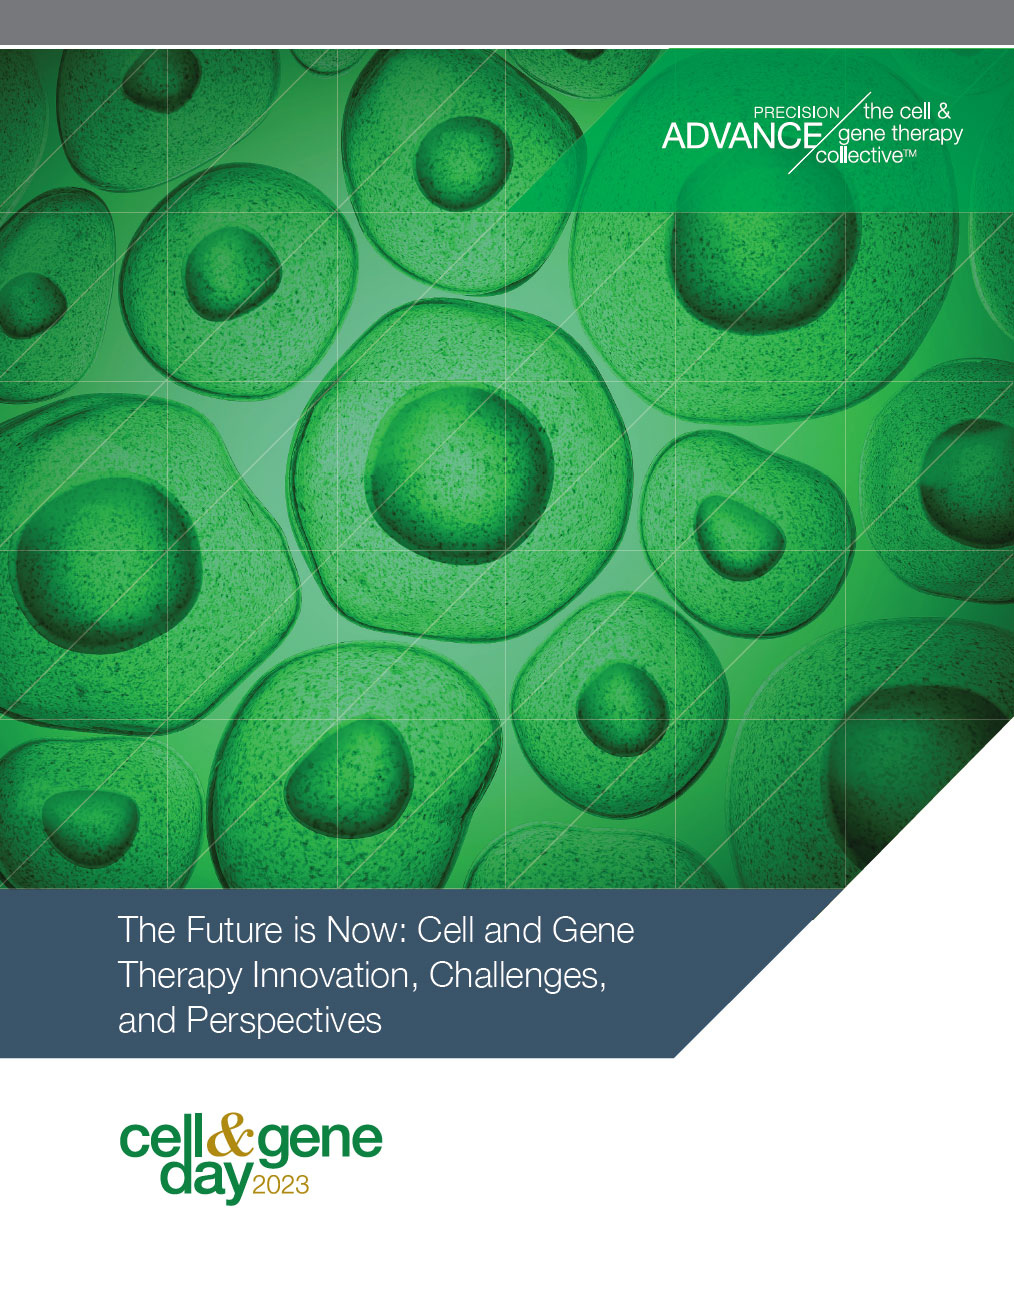 The Future is Now: Cell and Gene Therapy Innovation, Challenges, and Perspectives